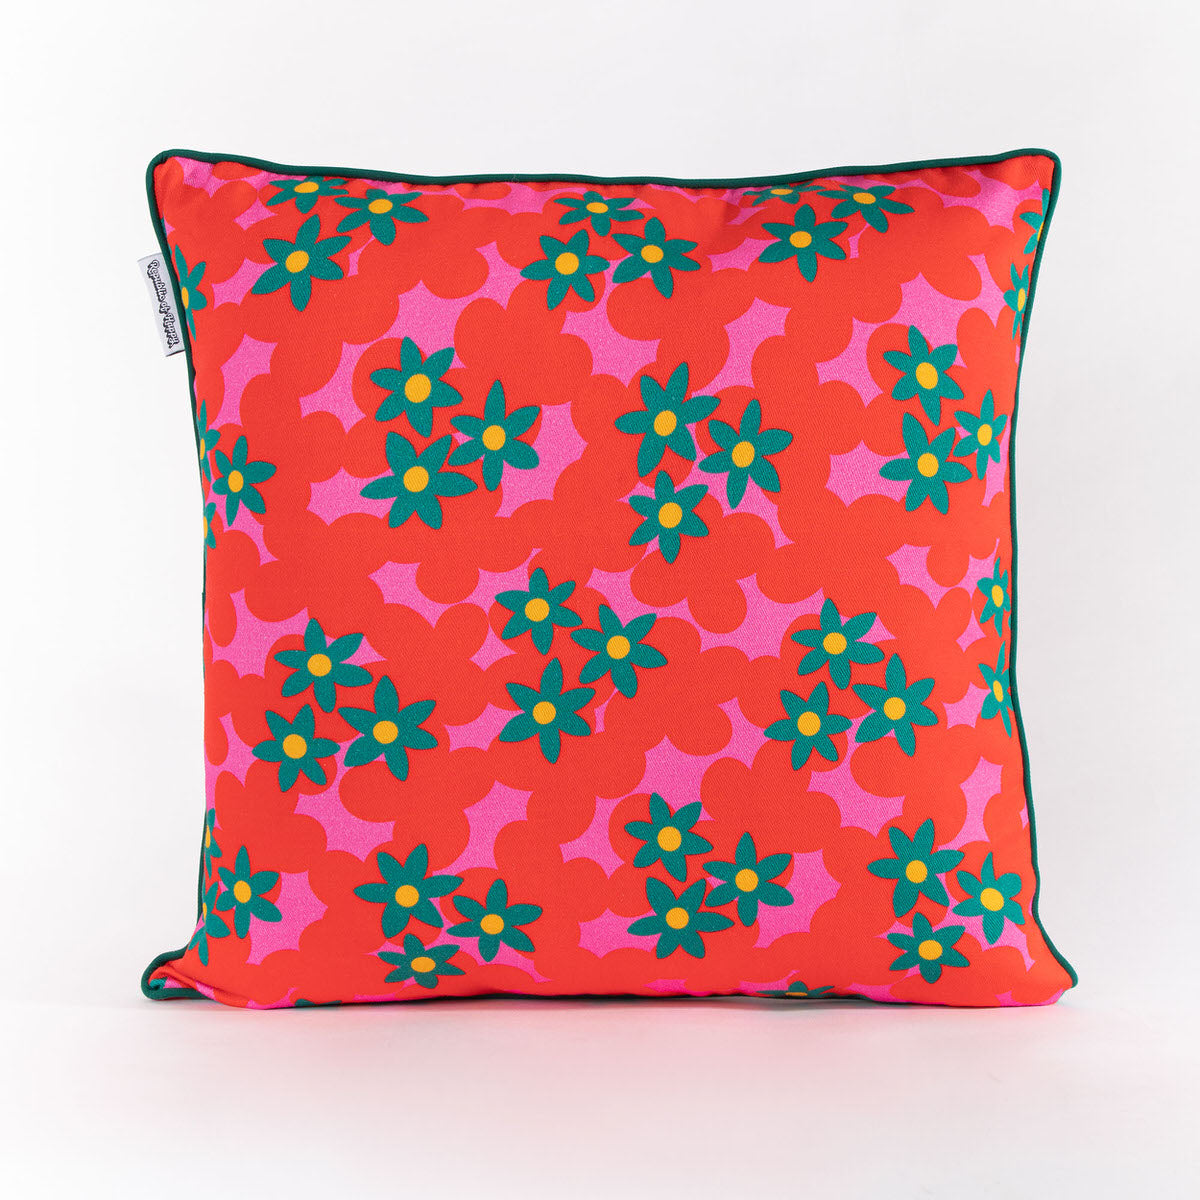 FLOWER FIELD - Bright and colourful double-sided cushion cover